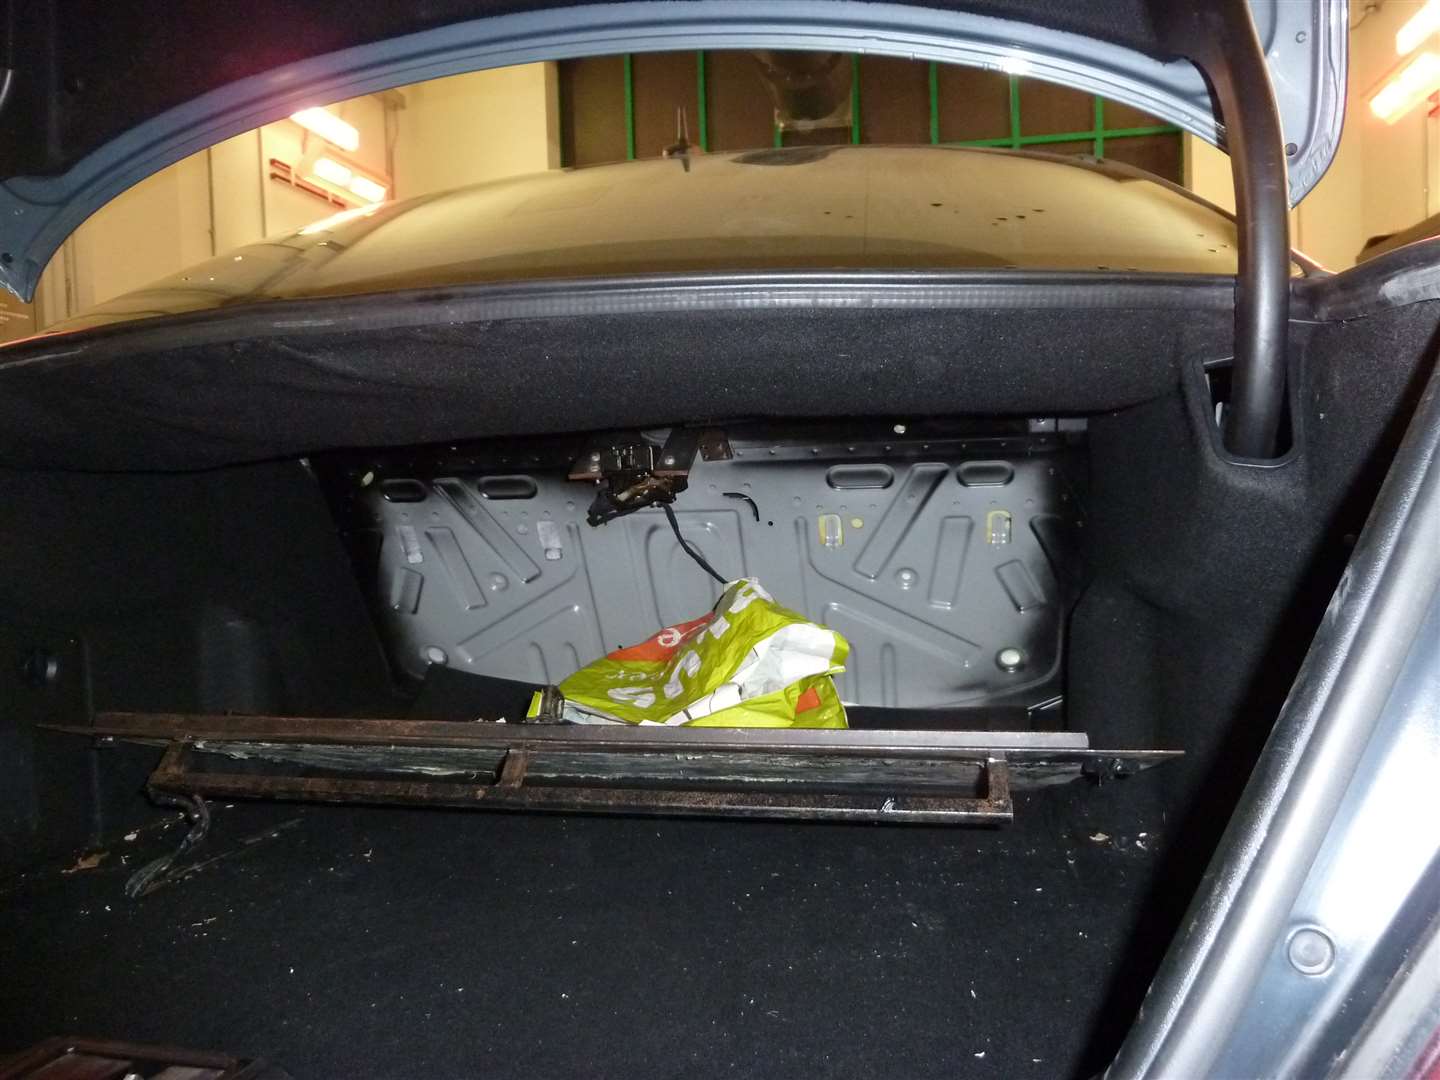 Cocaine found in vehicle